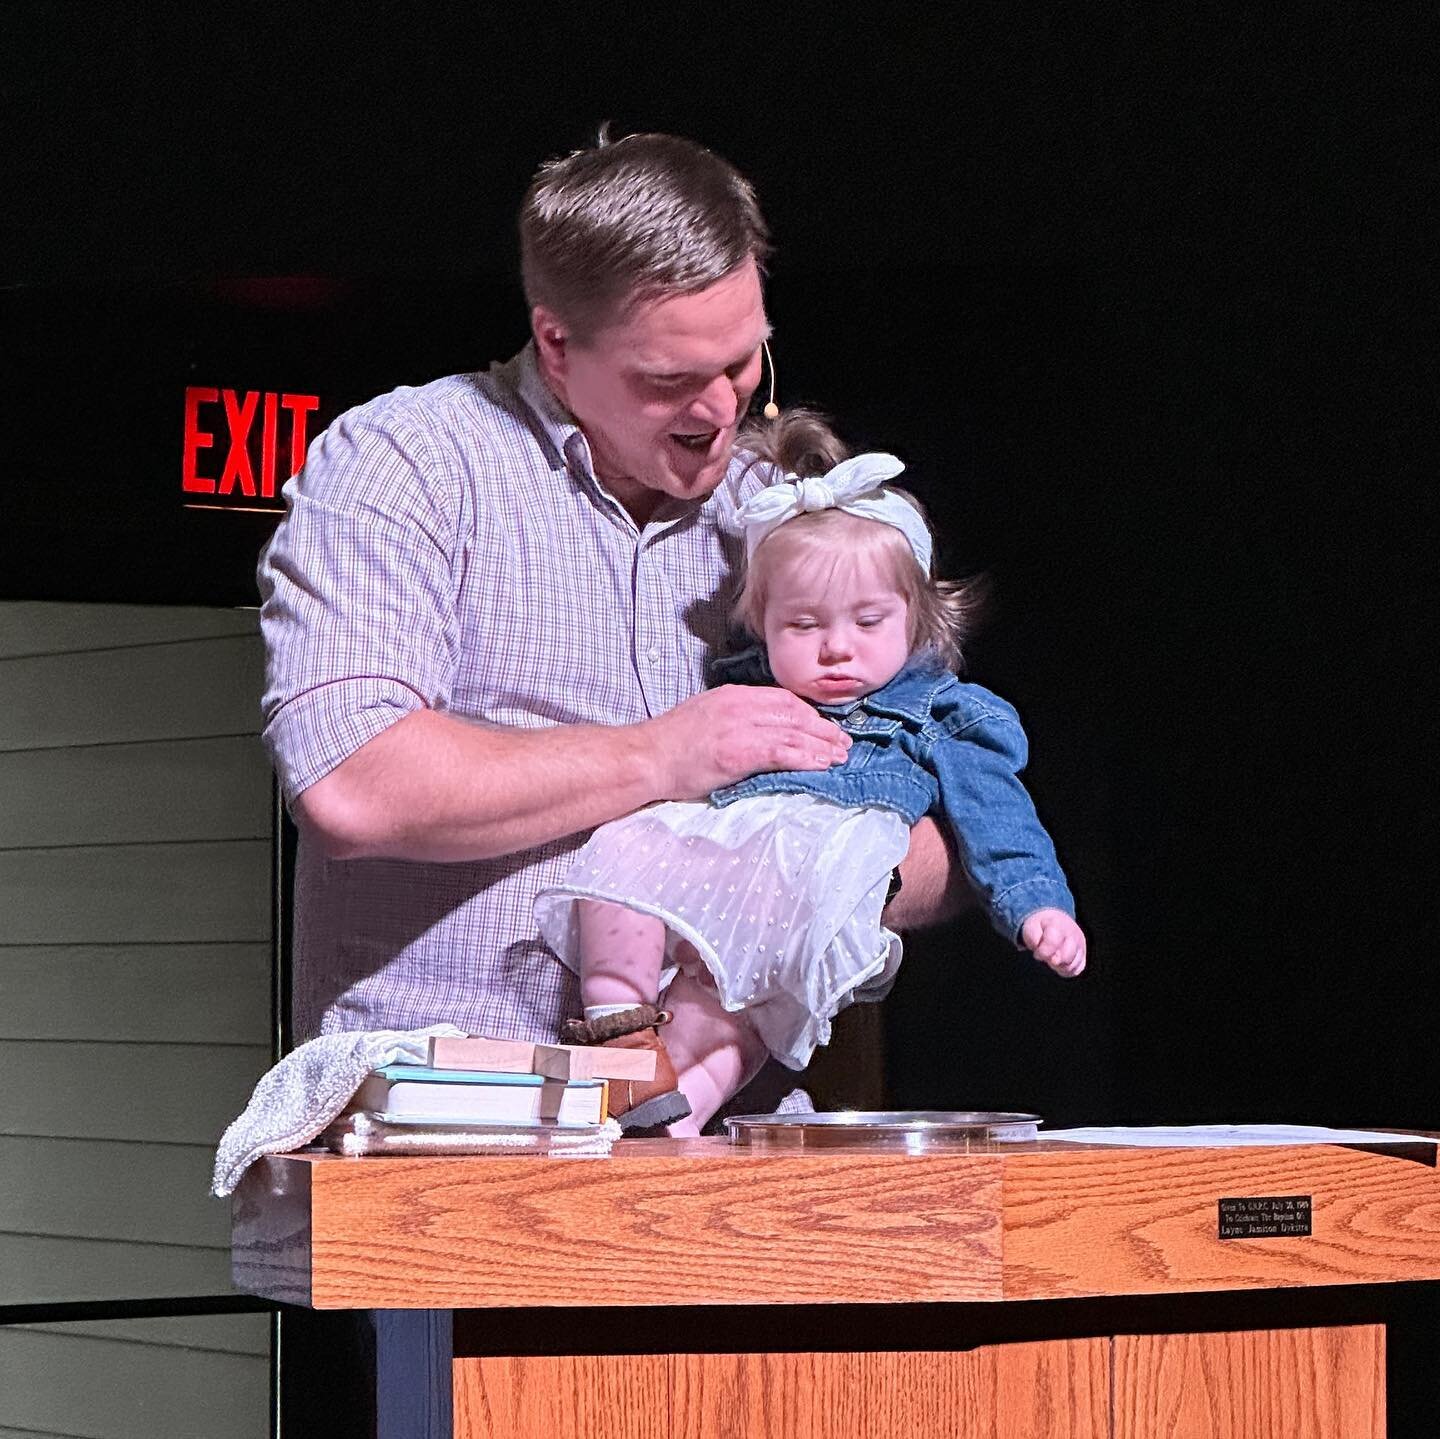 Yesterday we celebrated the baptism of Gracelyn Kay, daughter of Danica and Garret Rang, and Marietta Mae, daughter of Jennifer and Tyler Snoozy. So fitting for Mother's Day!  We also celebrated Gracelyn's mother, Danica, becoming a member of our chu